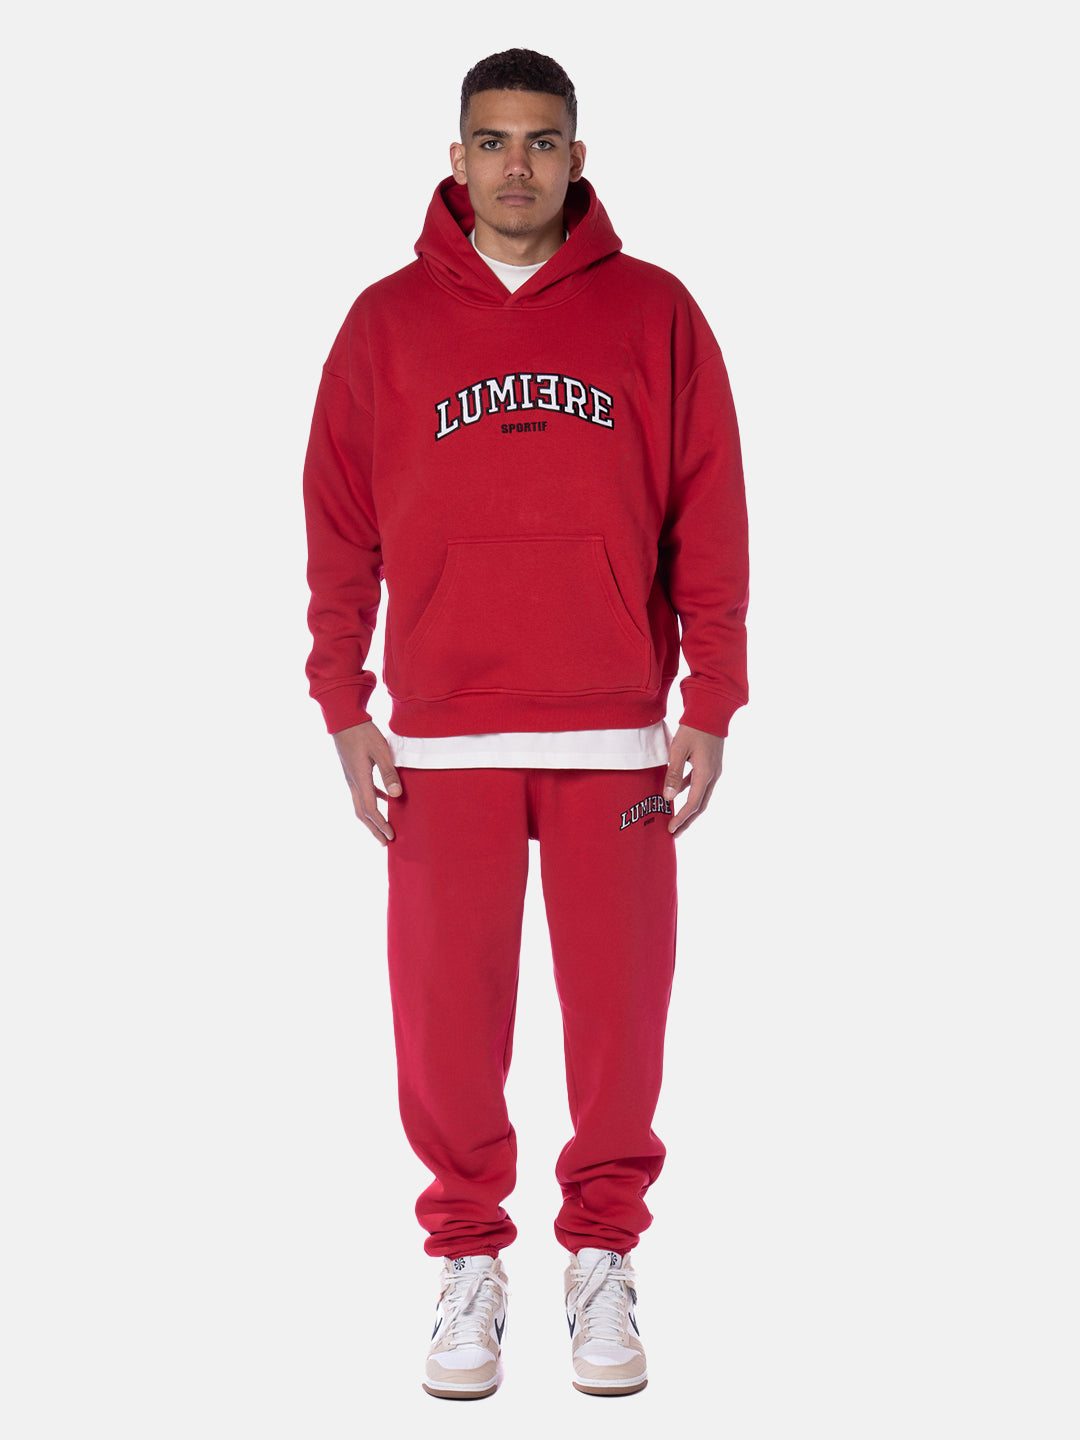 lumi3re sportif tracksuit red